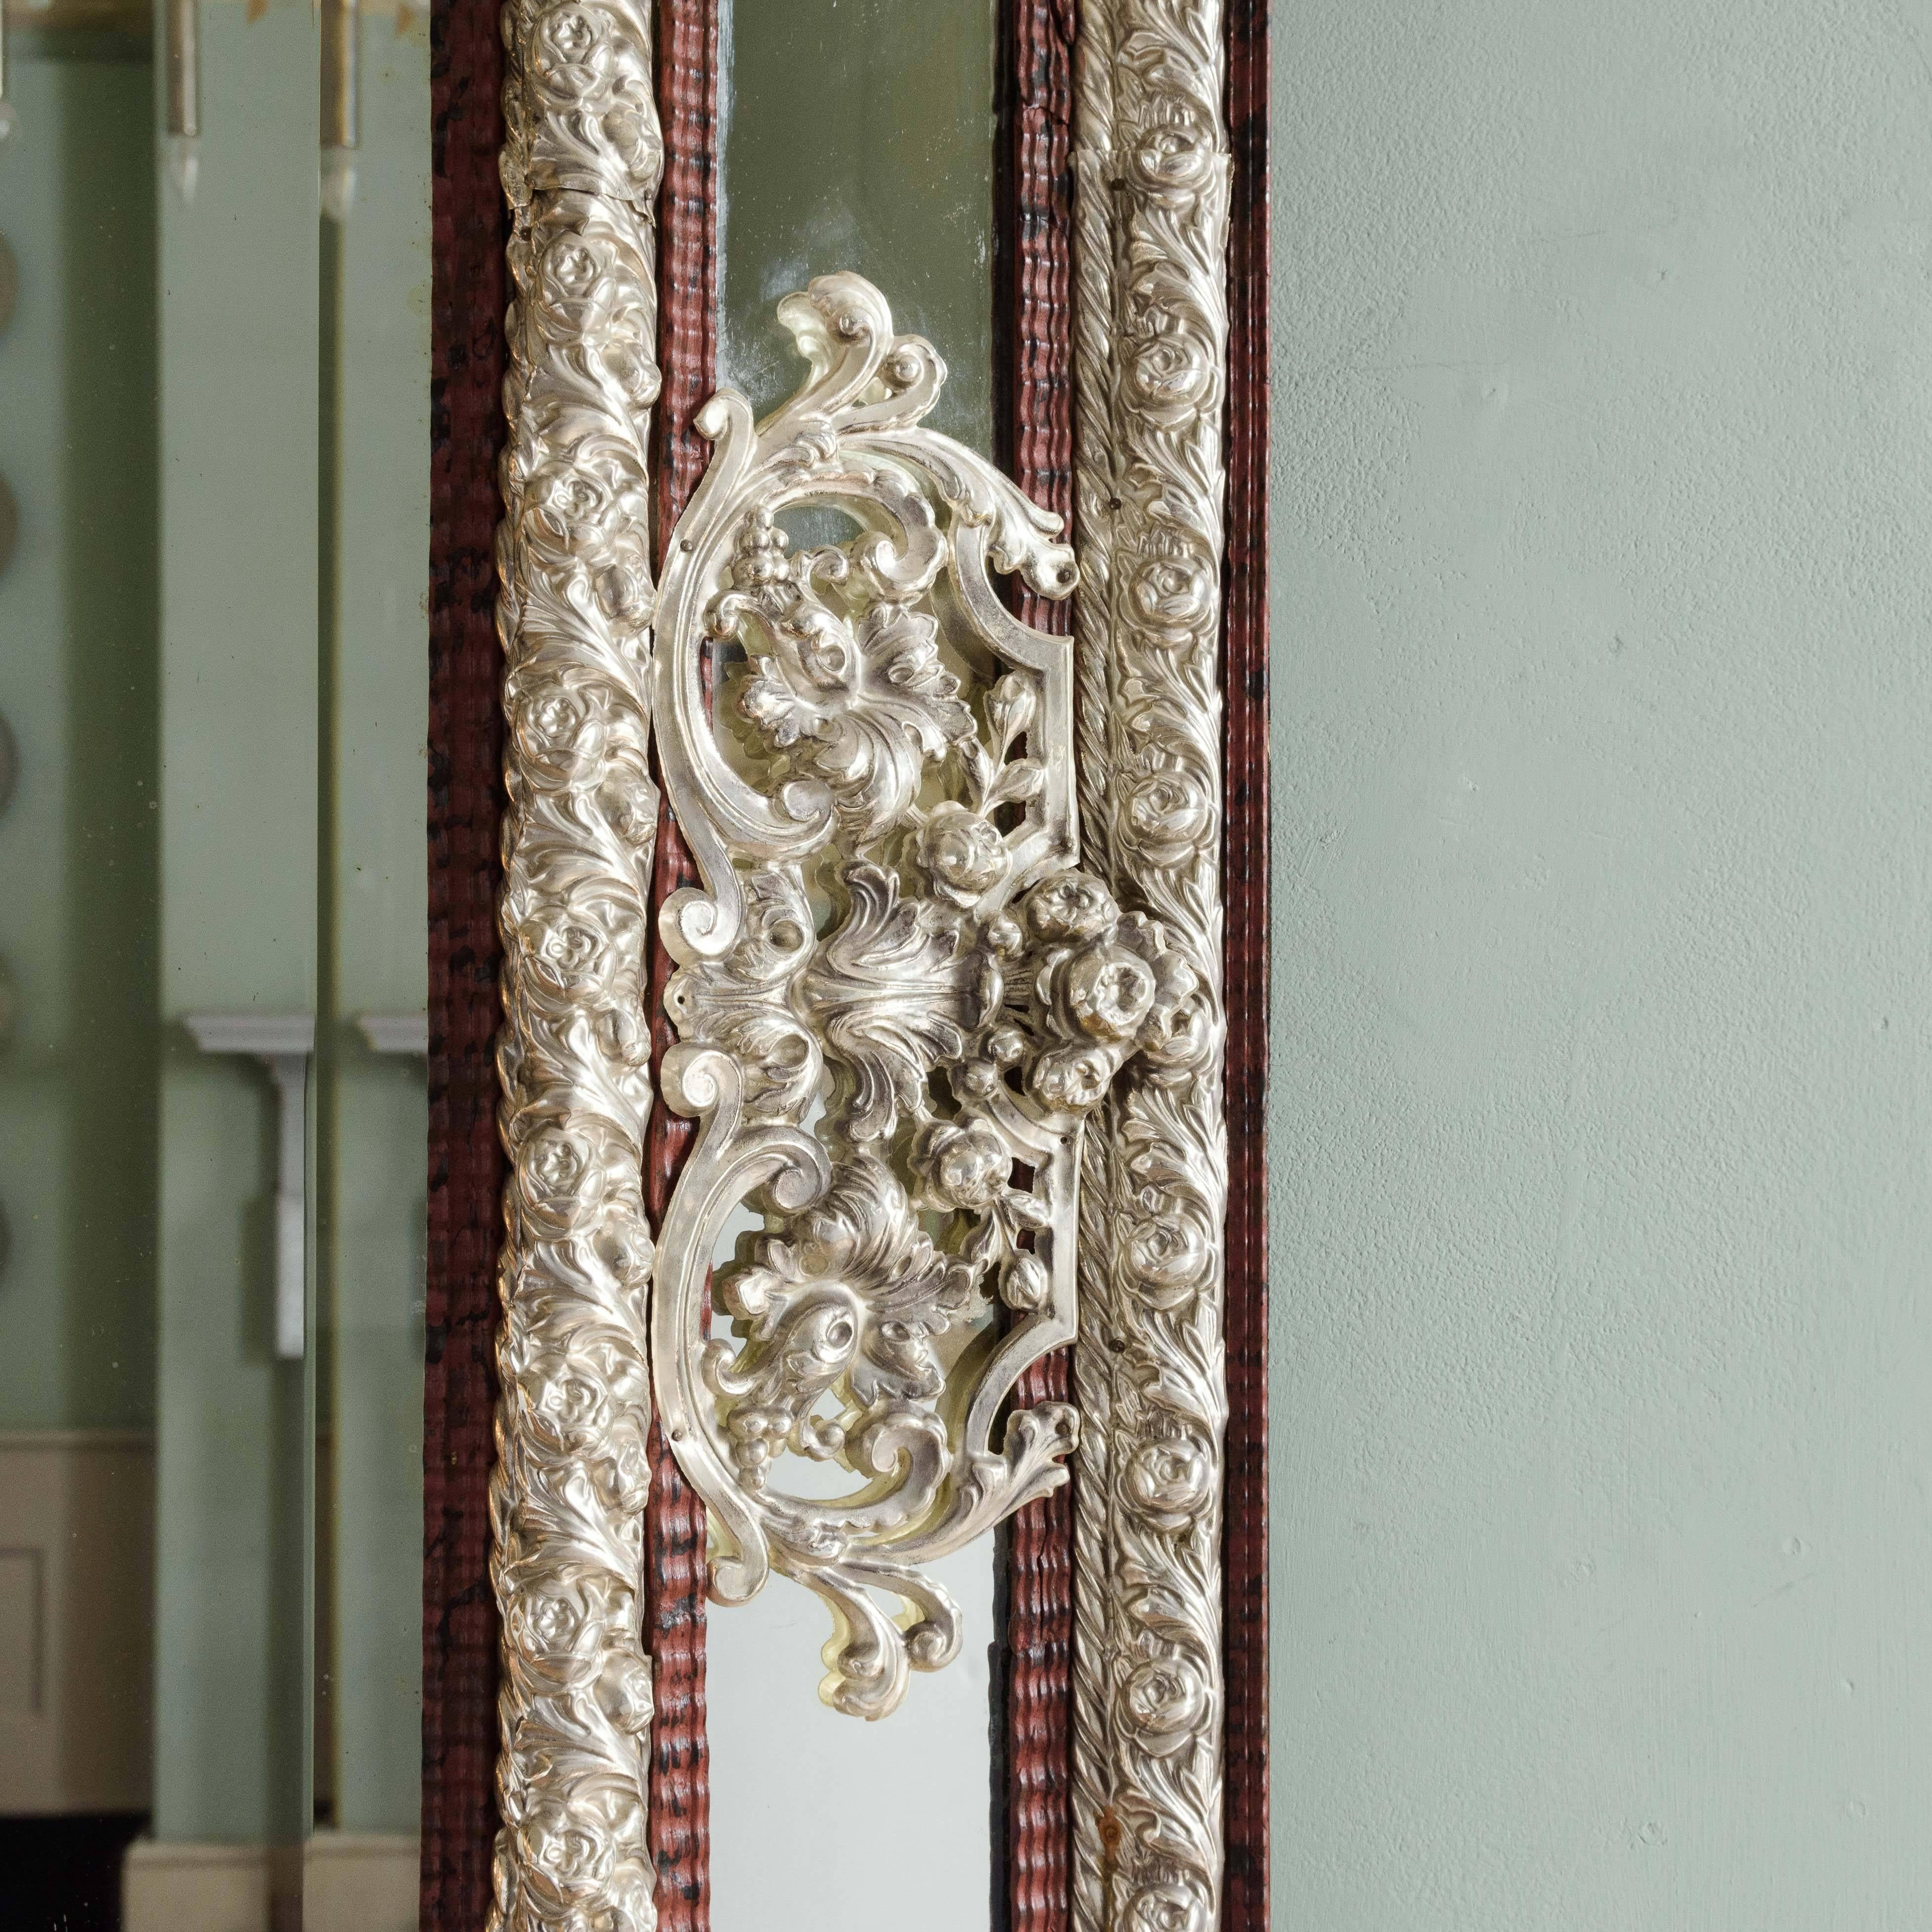 17th century style Dutch mirror, the silvered repousse metalwork and faux tortoiseshell ripple moulded frame surrounding central bevelled plate.

Dimensions: 158cm (62¼